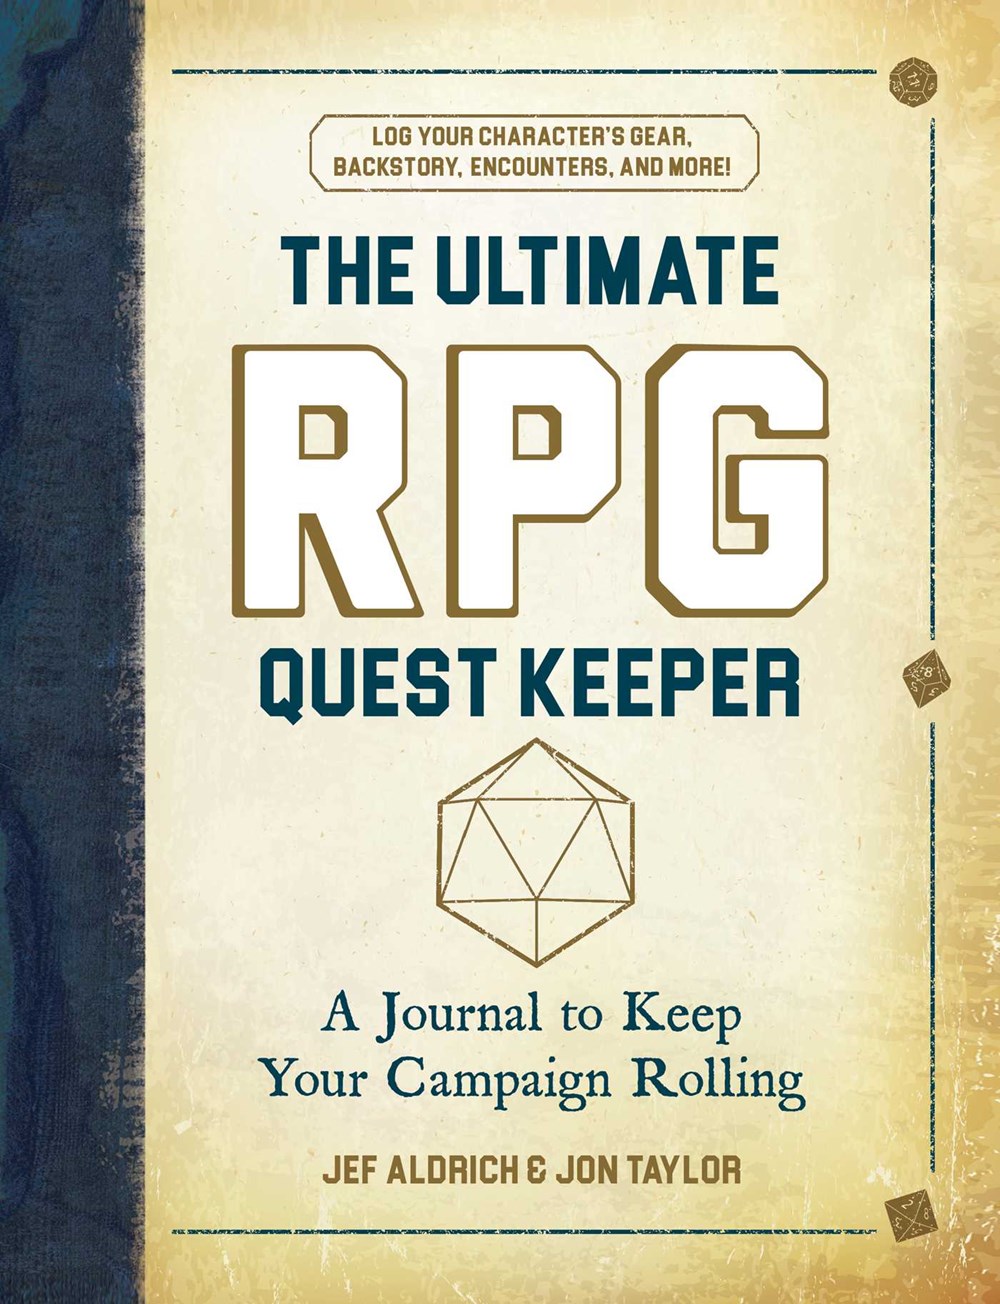 The Ultimate RPG Quest Keeper: A Journal to Keep Your Campaign Rolling